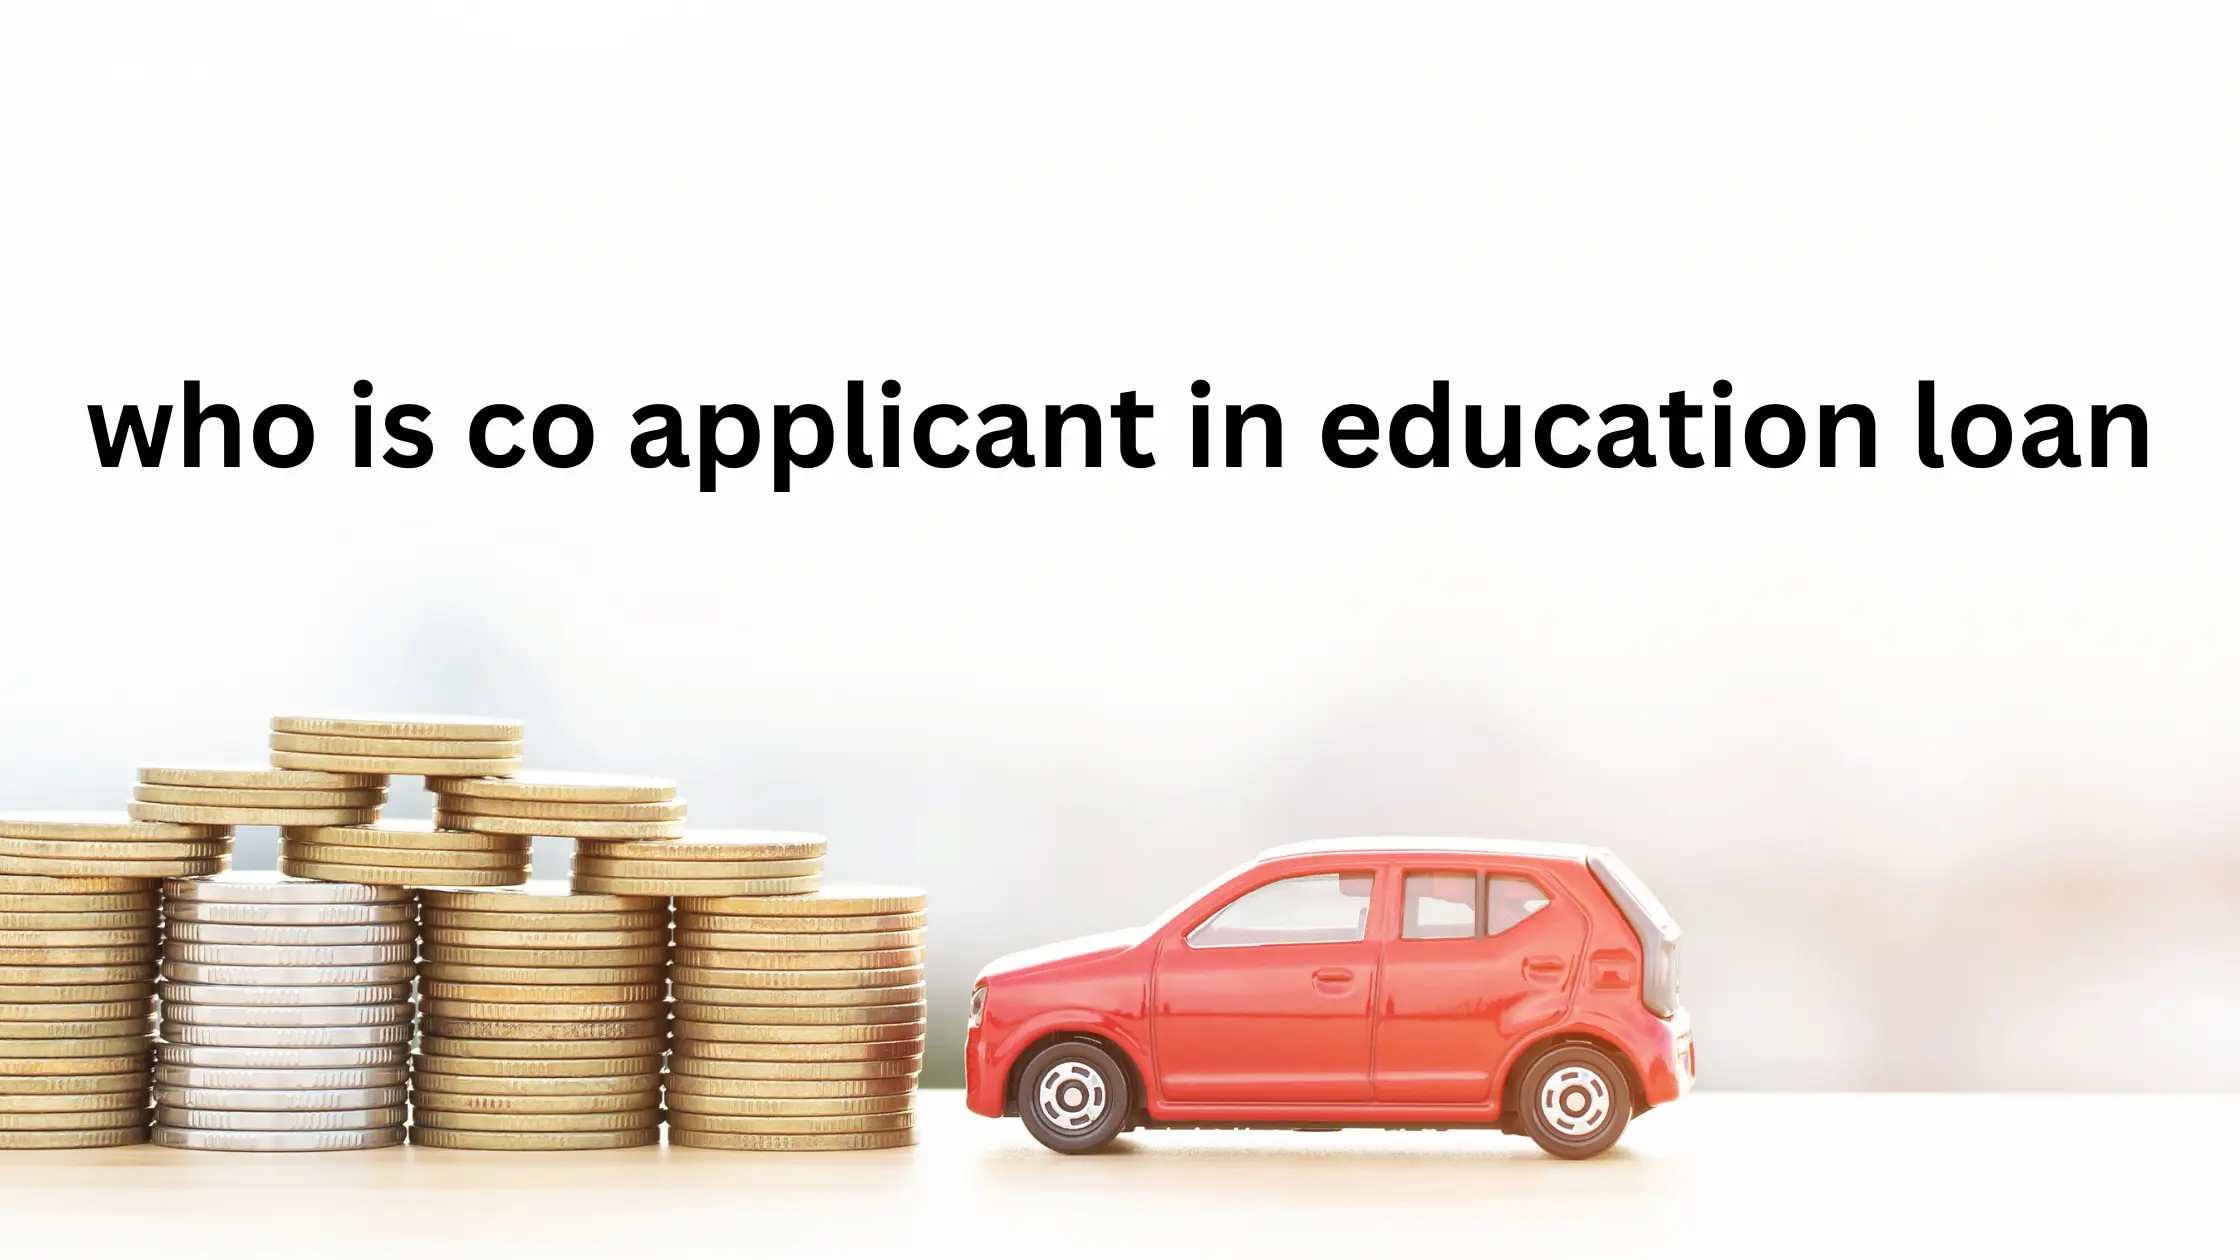 who is co applicant in education loan